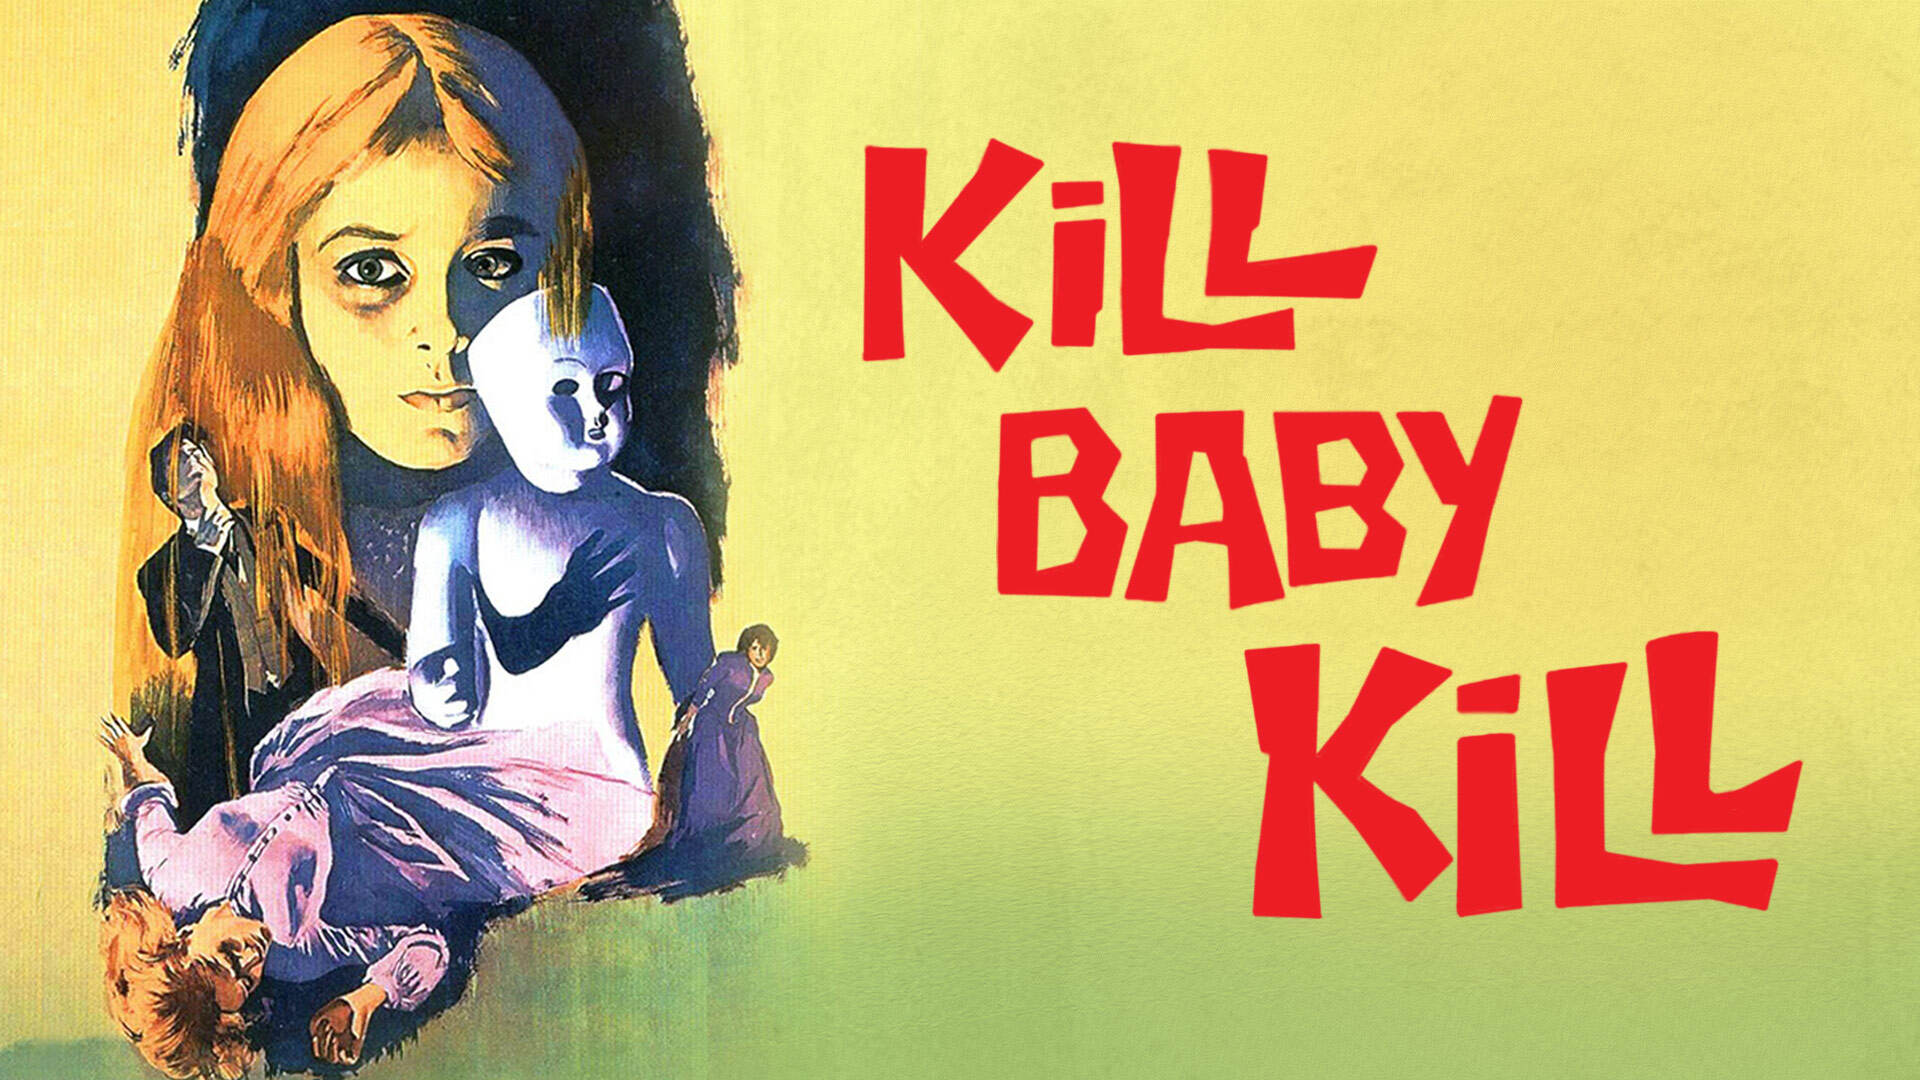 41-facts-about-the-movie-kill-baby